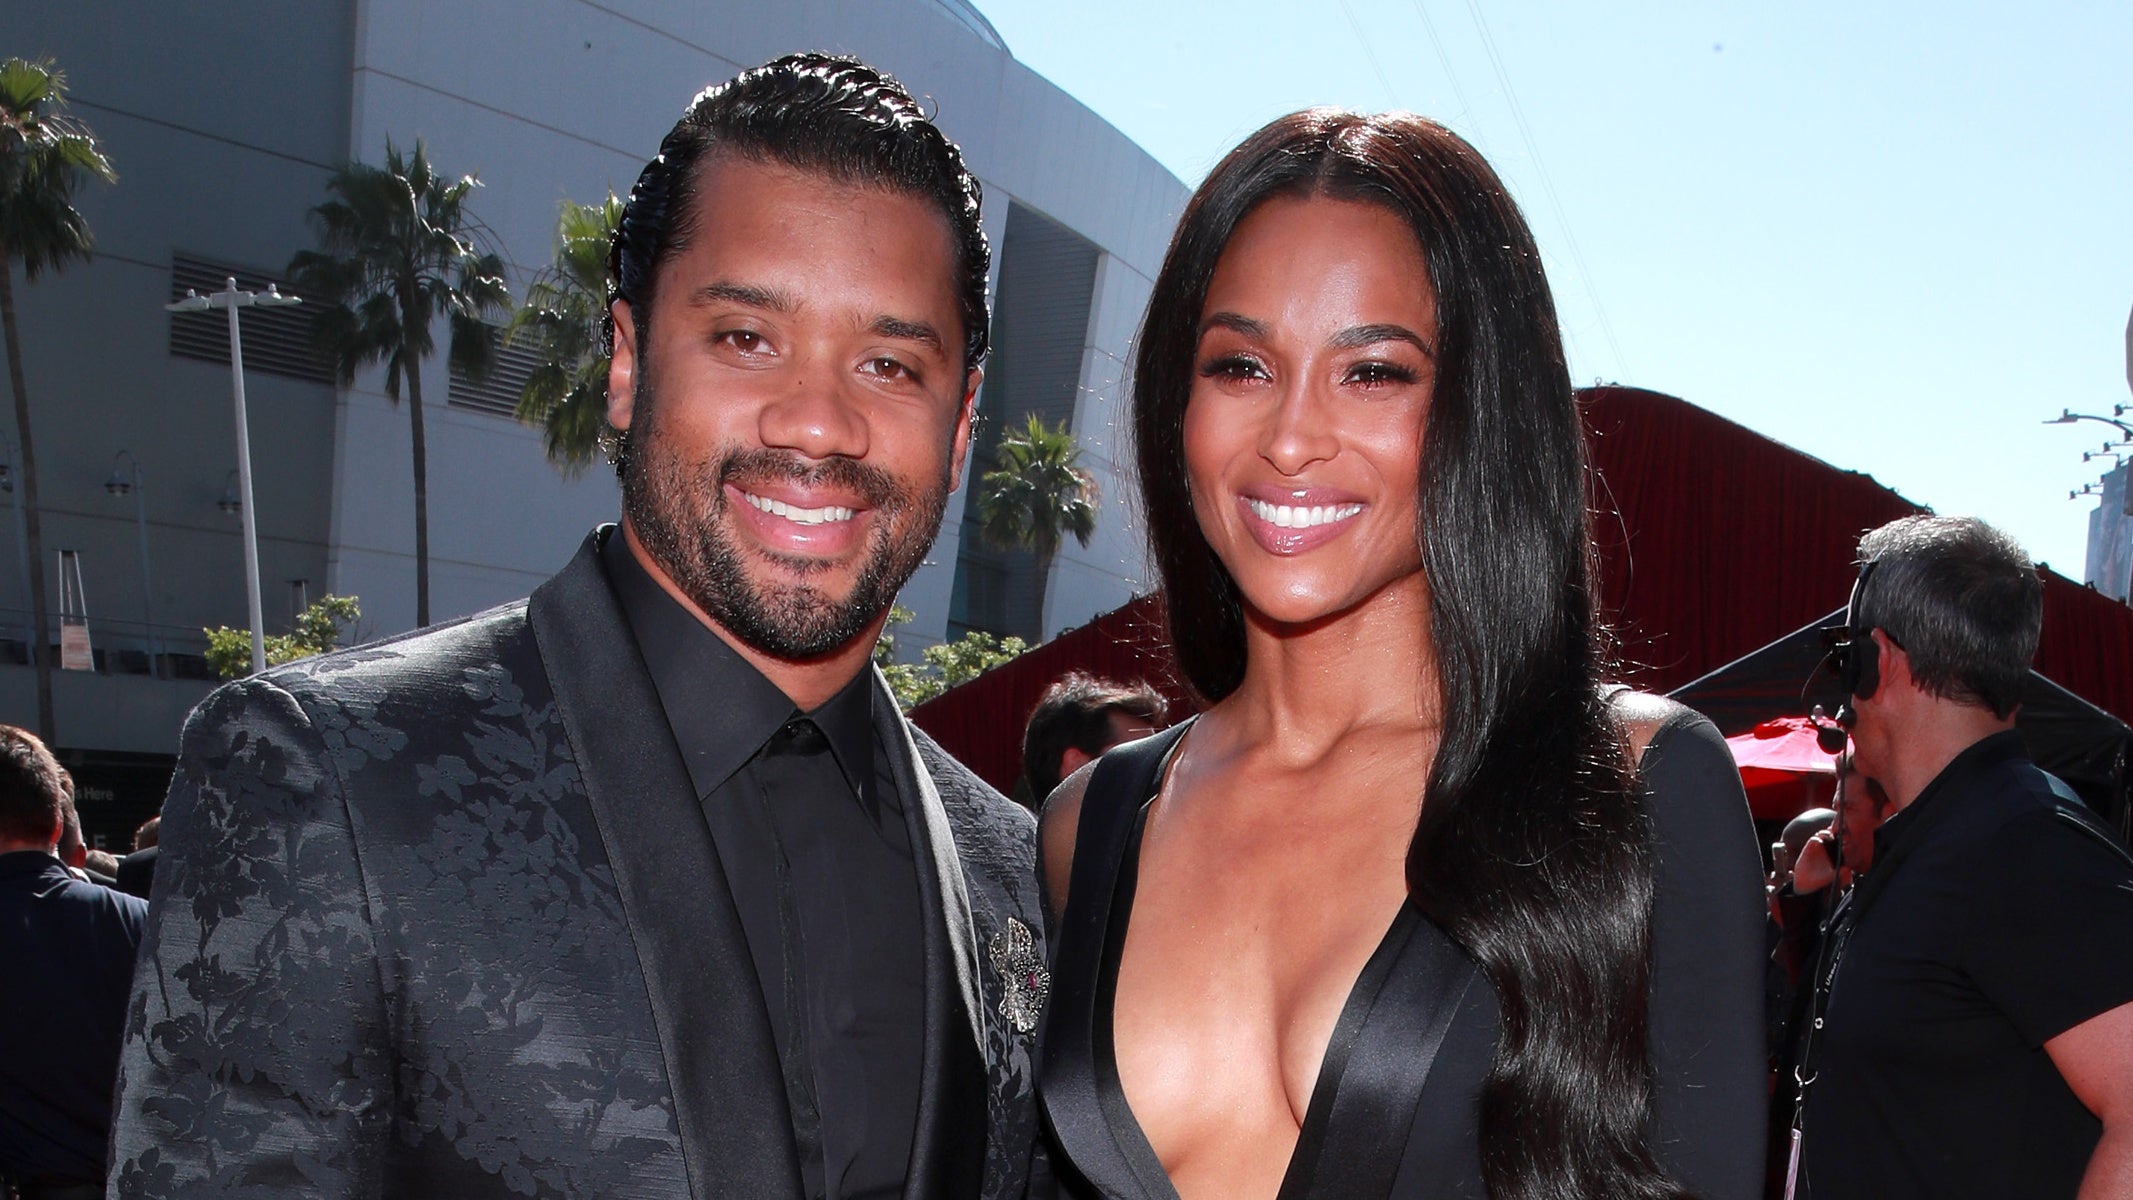 The Best Looks At The 2019 ESPY Awards